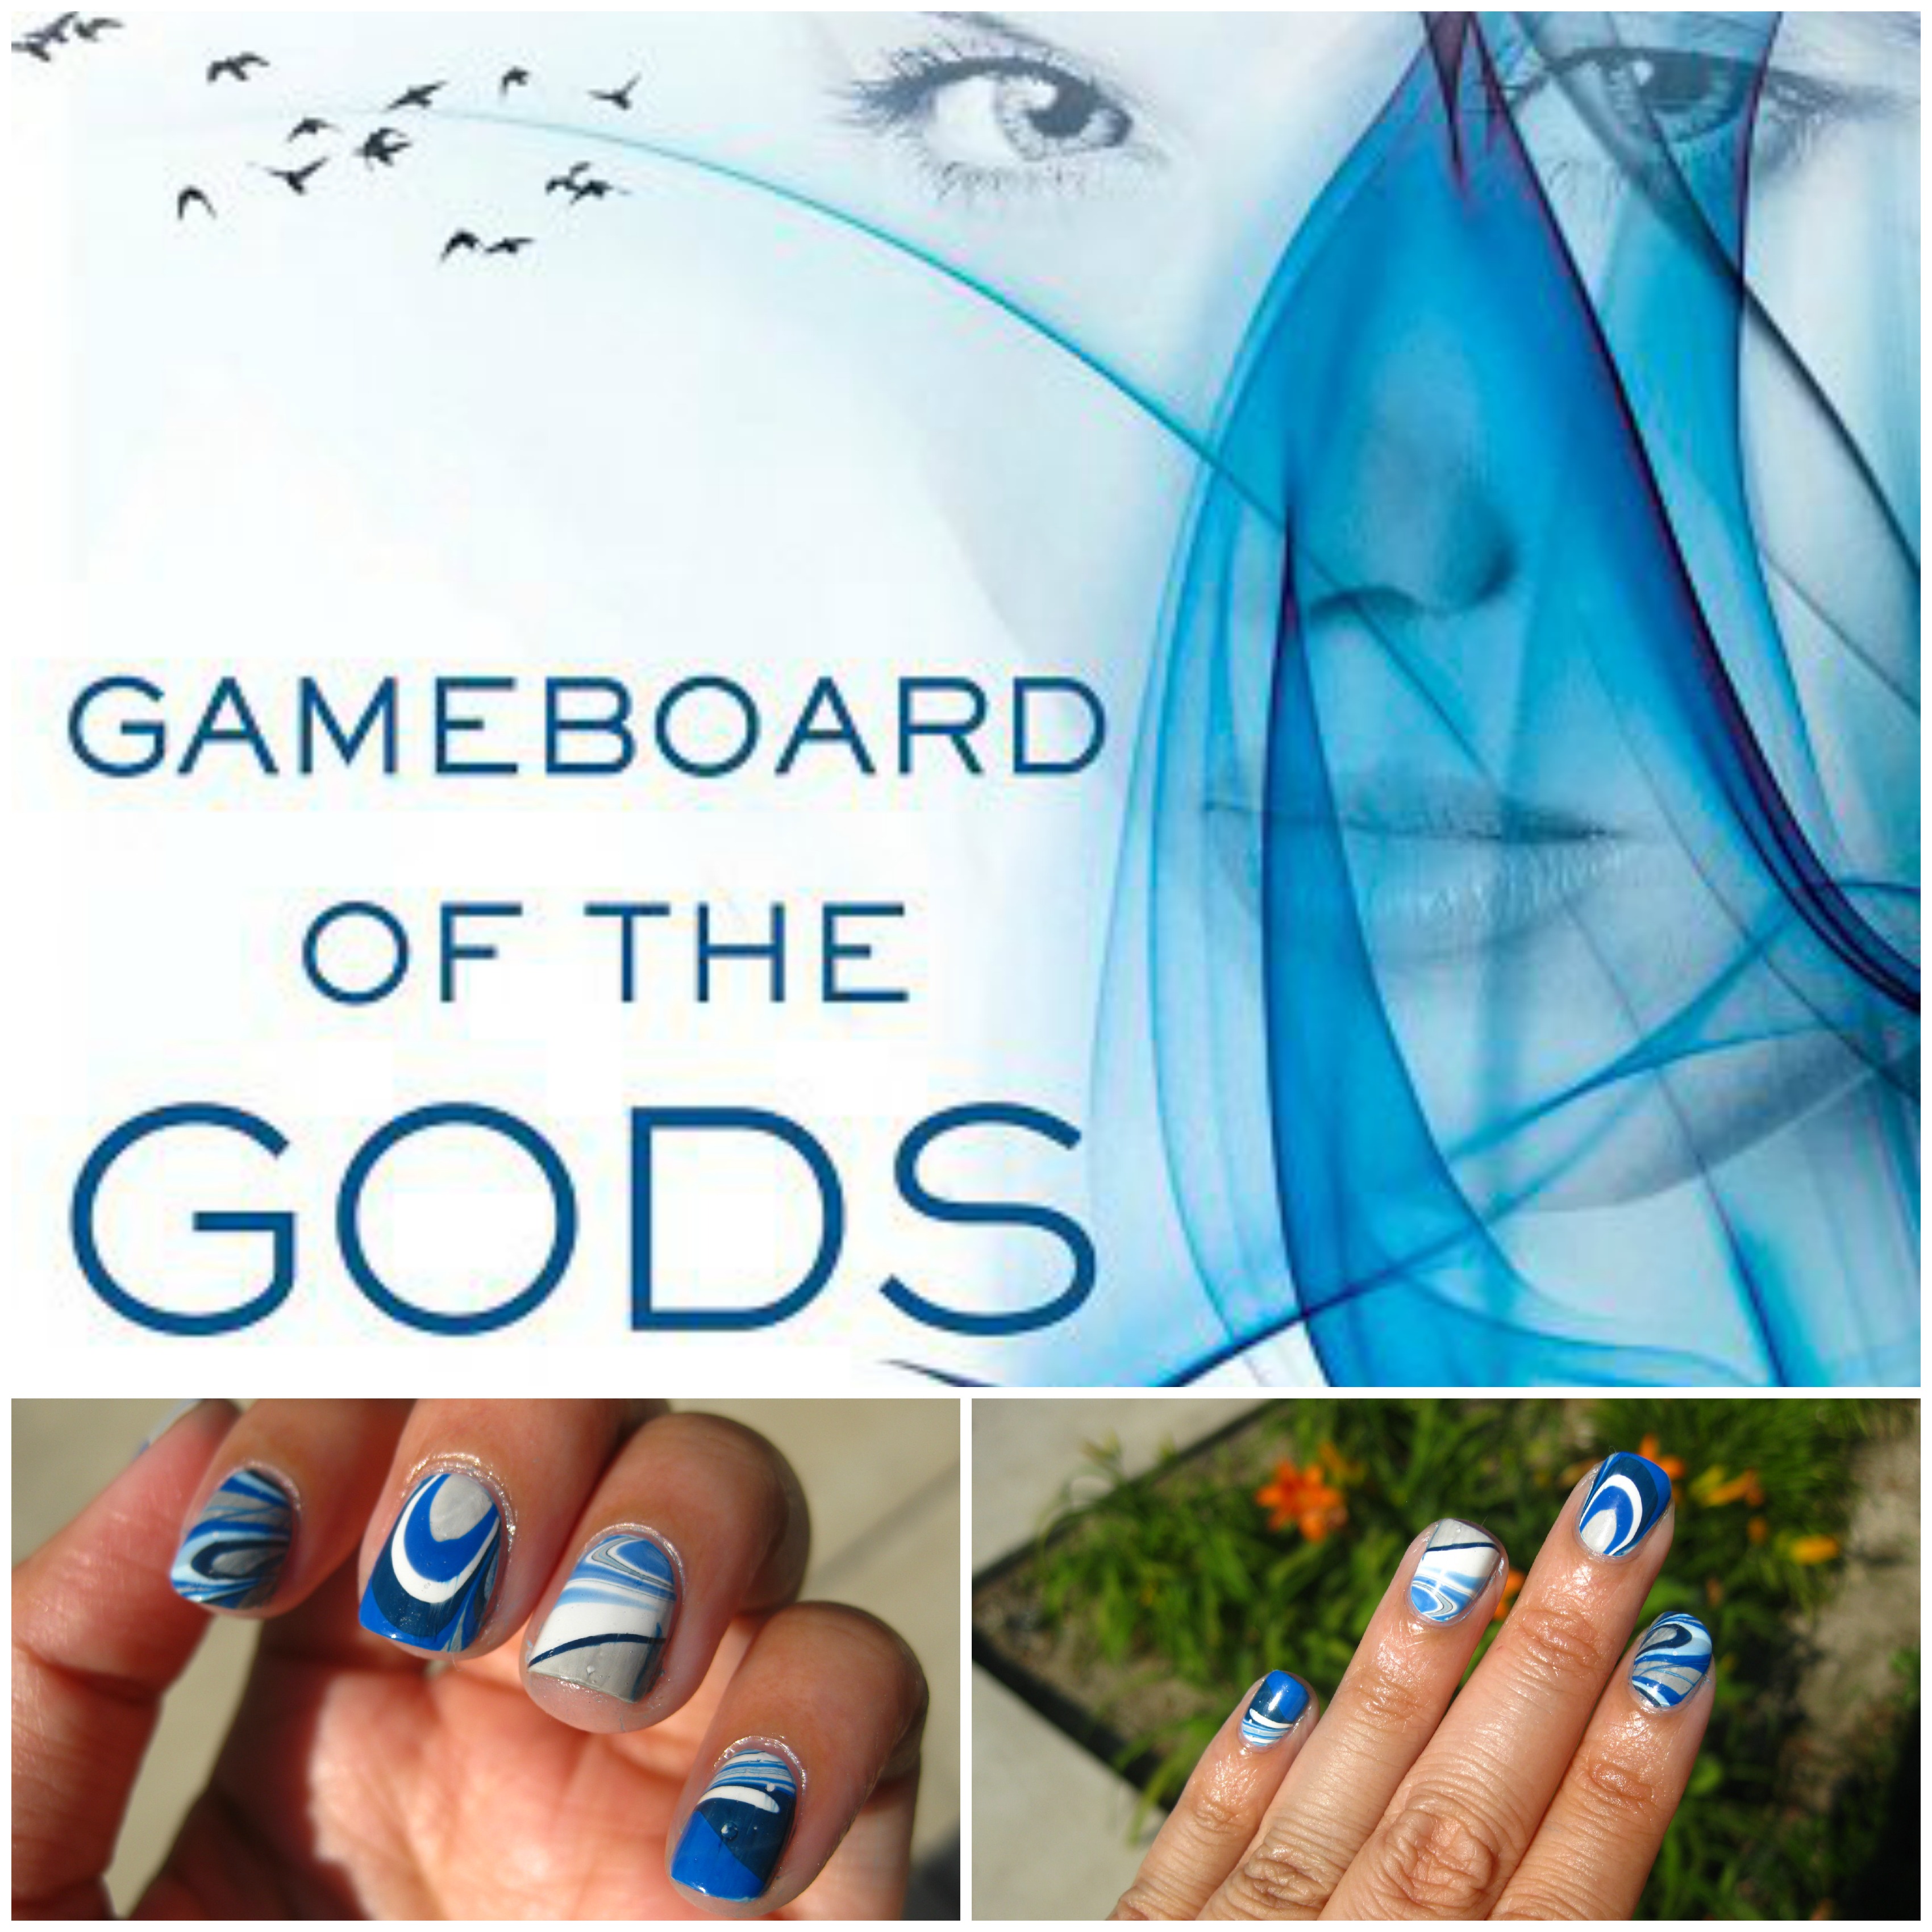 Manicure Monday (18): Gameboard of the Gods